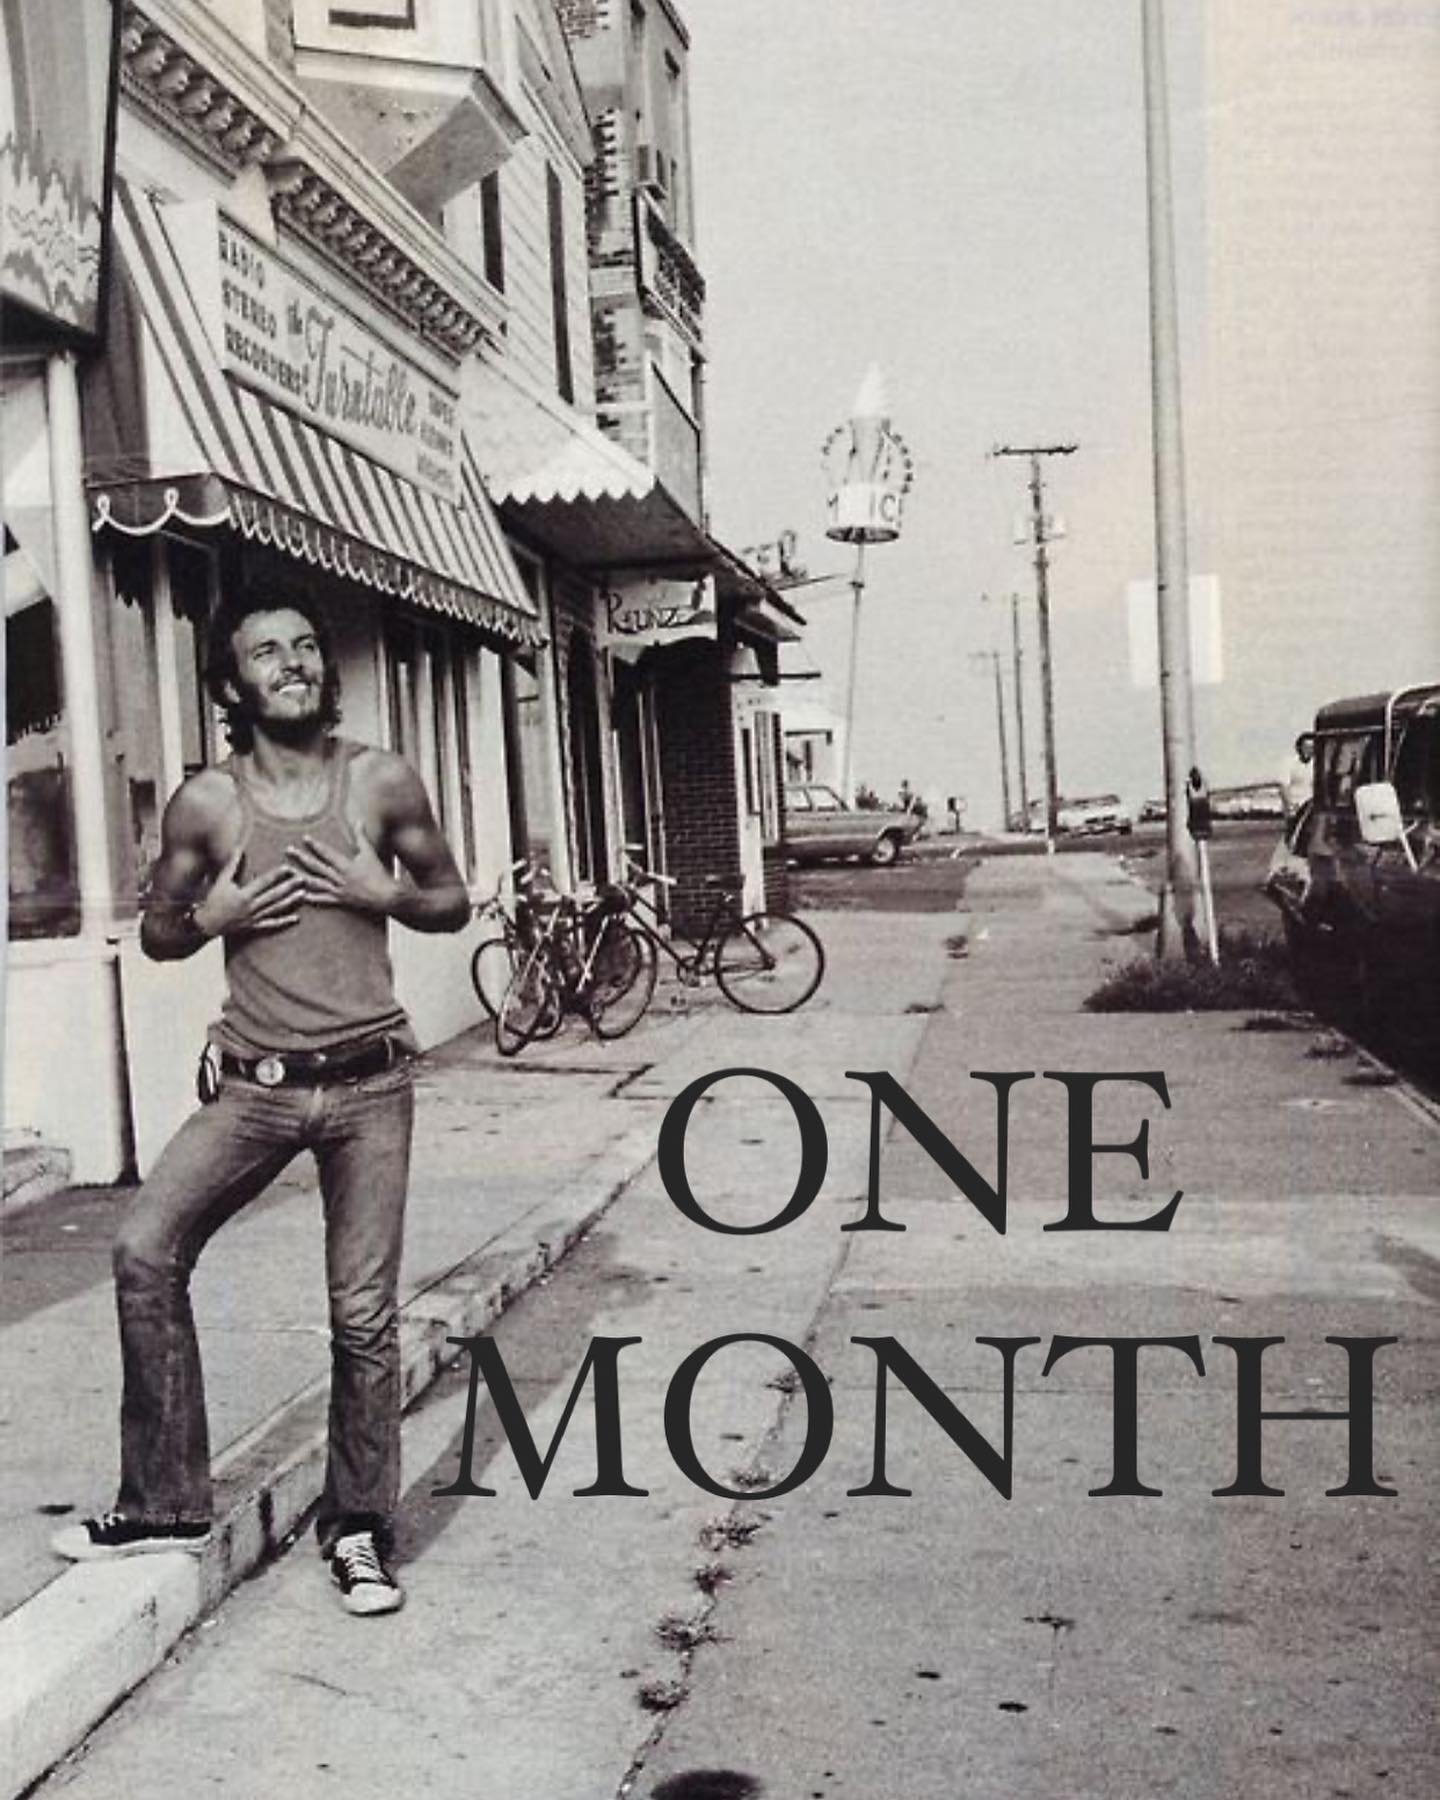 A MONTH FROM TODAY! ARE YOU READY?!?! 
Image: The Boss in his beloved NJ, 1973 by David Gahr
#vintage #1970s #brucespringsteen #baltimorevintageexpo #vintagestyle